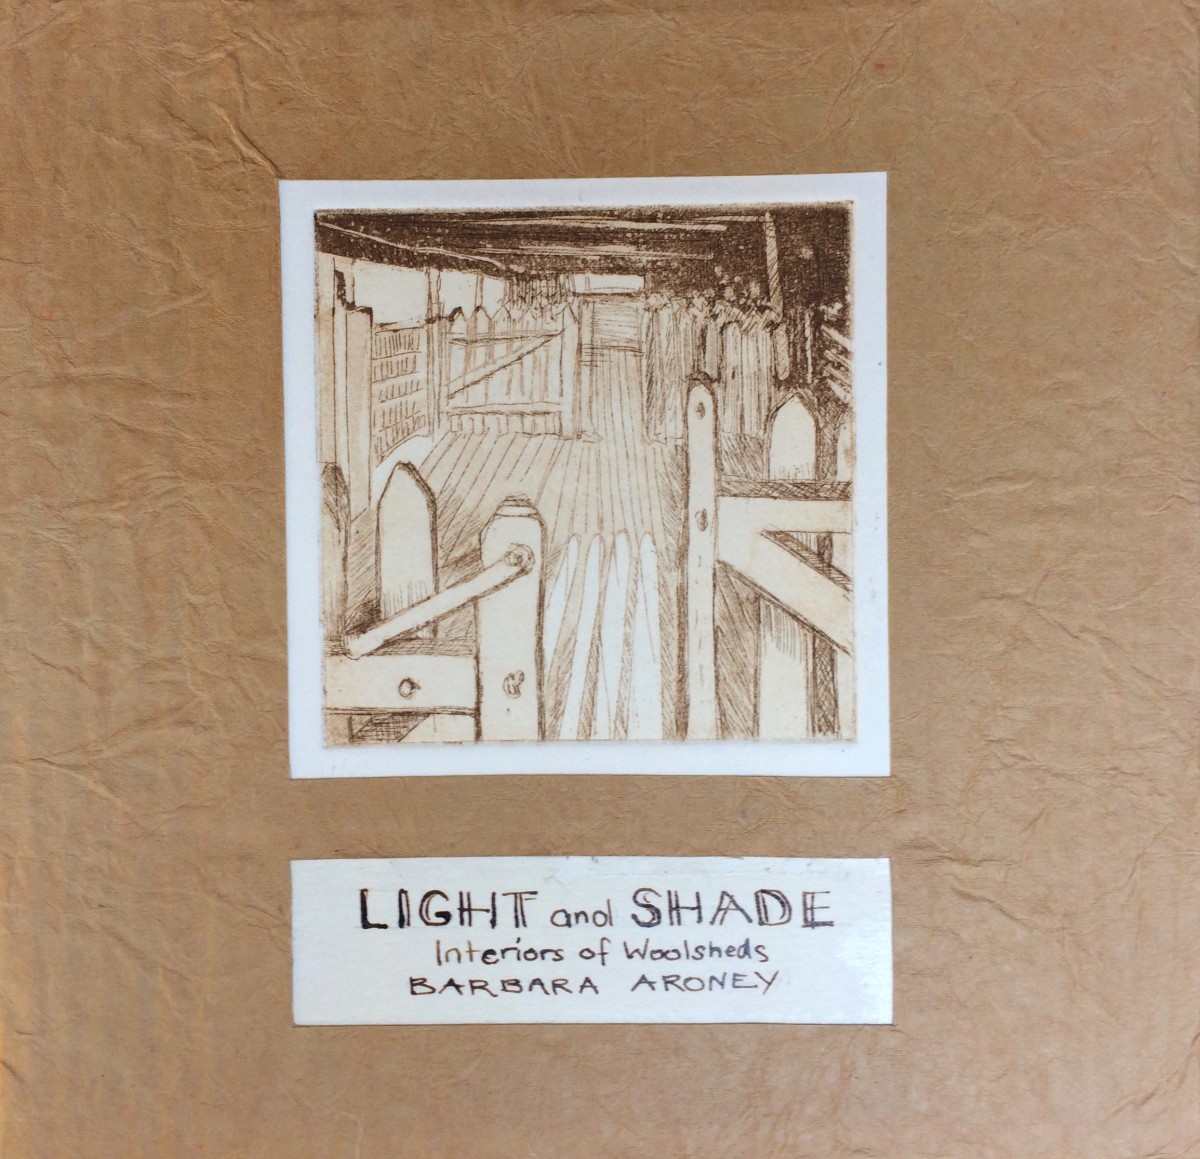 Light and Shade - Interiors of Woolsheds by Barbara Aroney 